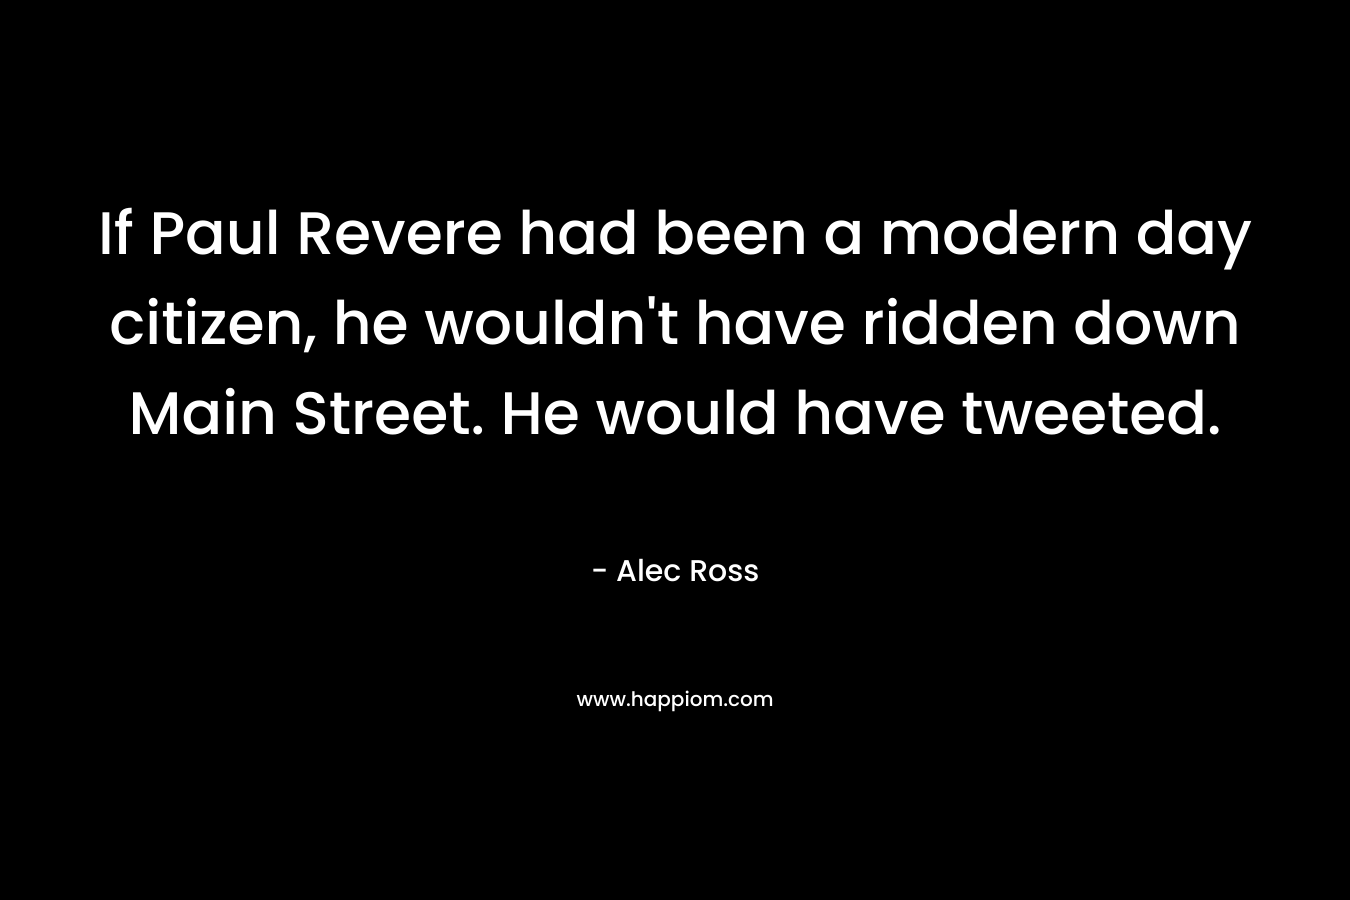 If Paul Revere had been a modern day citizen, he wouldn't have ridden down Main Street. He would have tweeted.